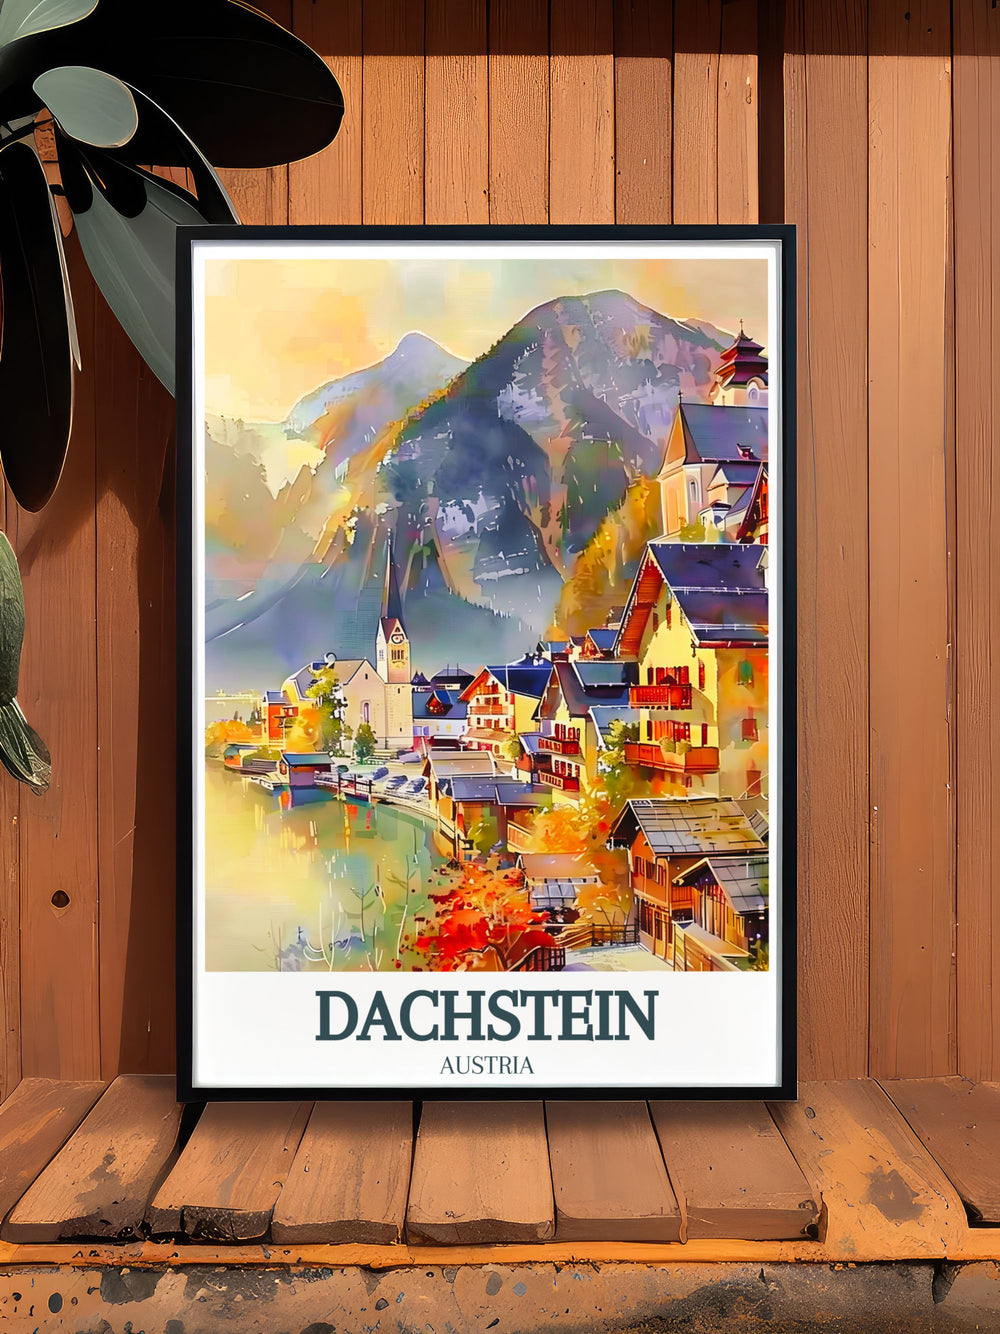 Captivating Hallstatt Lake, Village of Hallstatt artwork showcasing the tranquil waters and timeless beauty of this Austrian destination ideal for enhancing any living space with elegance and charm.